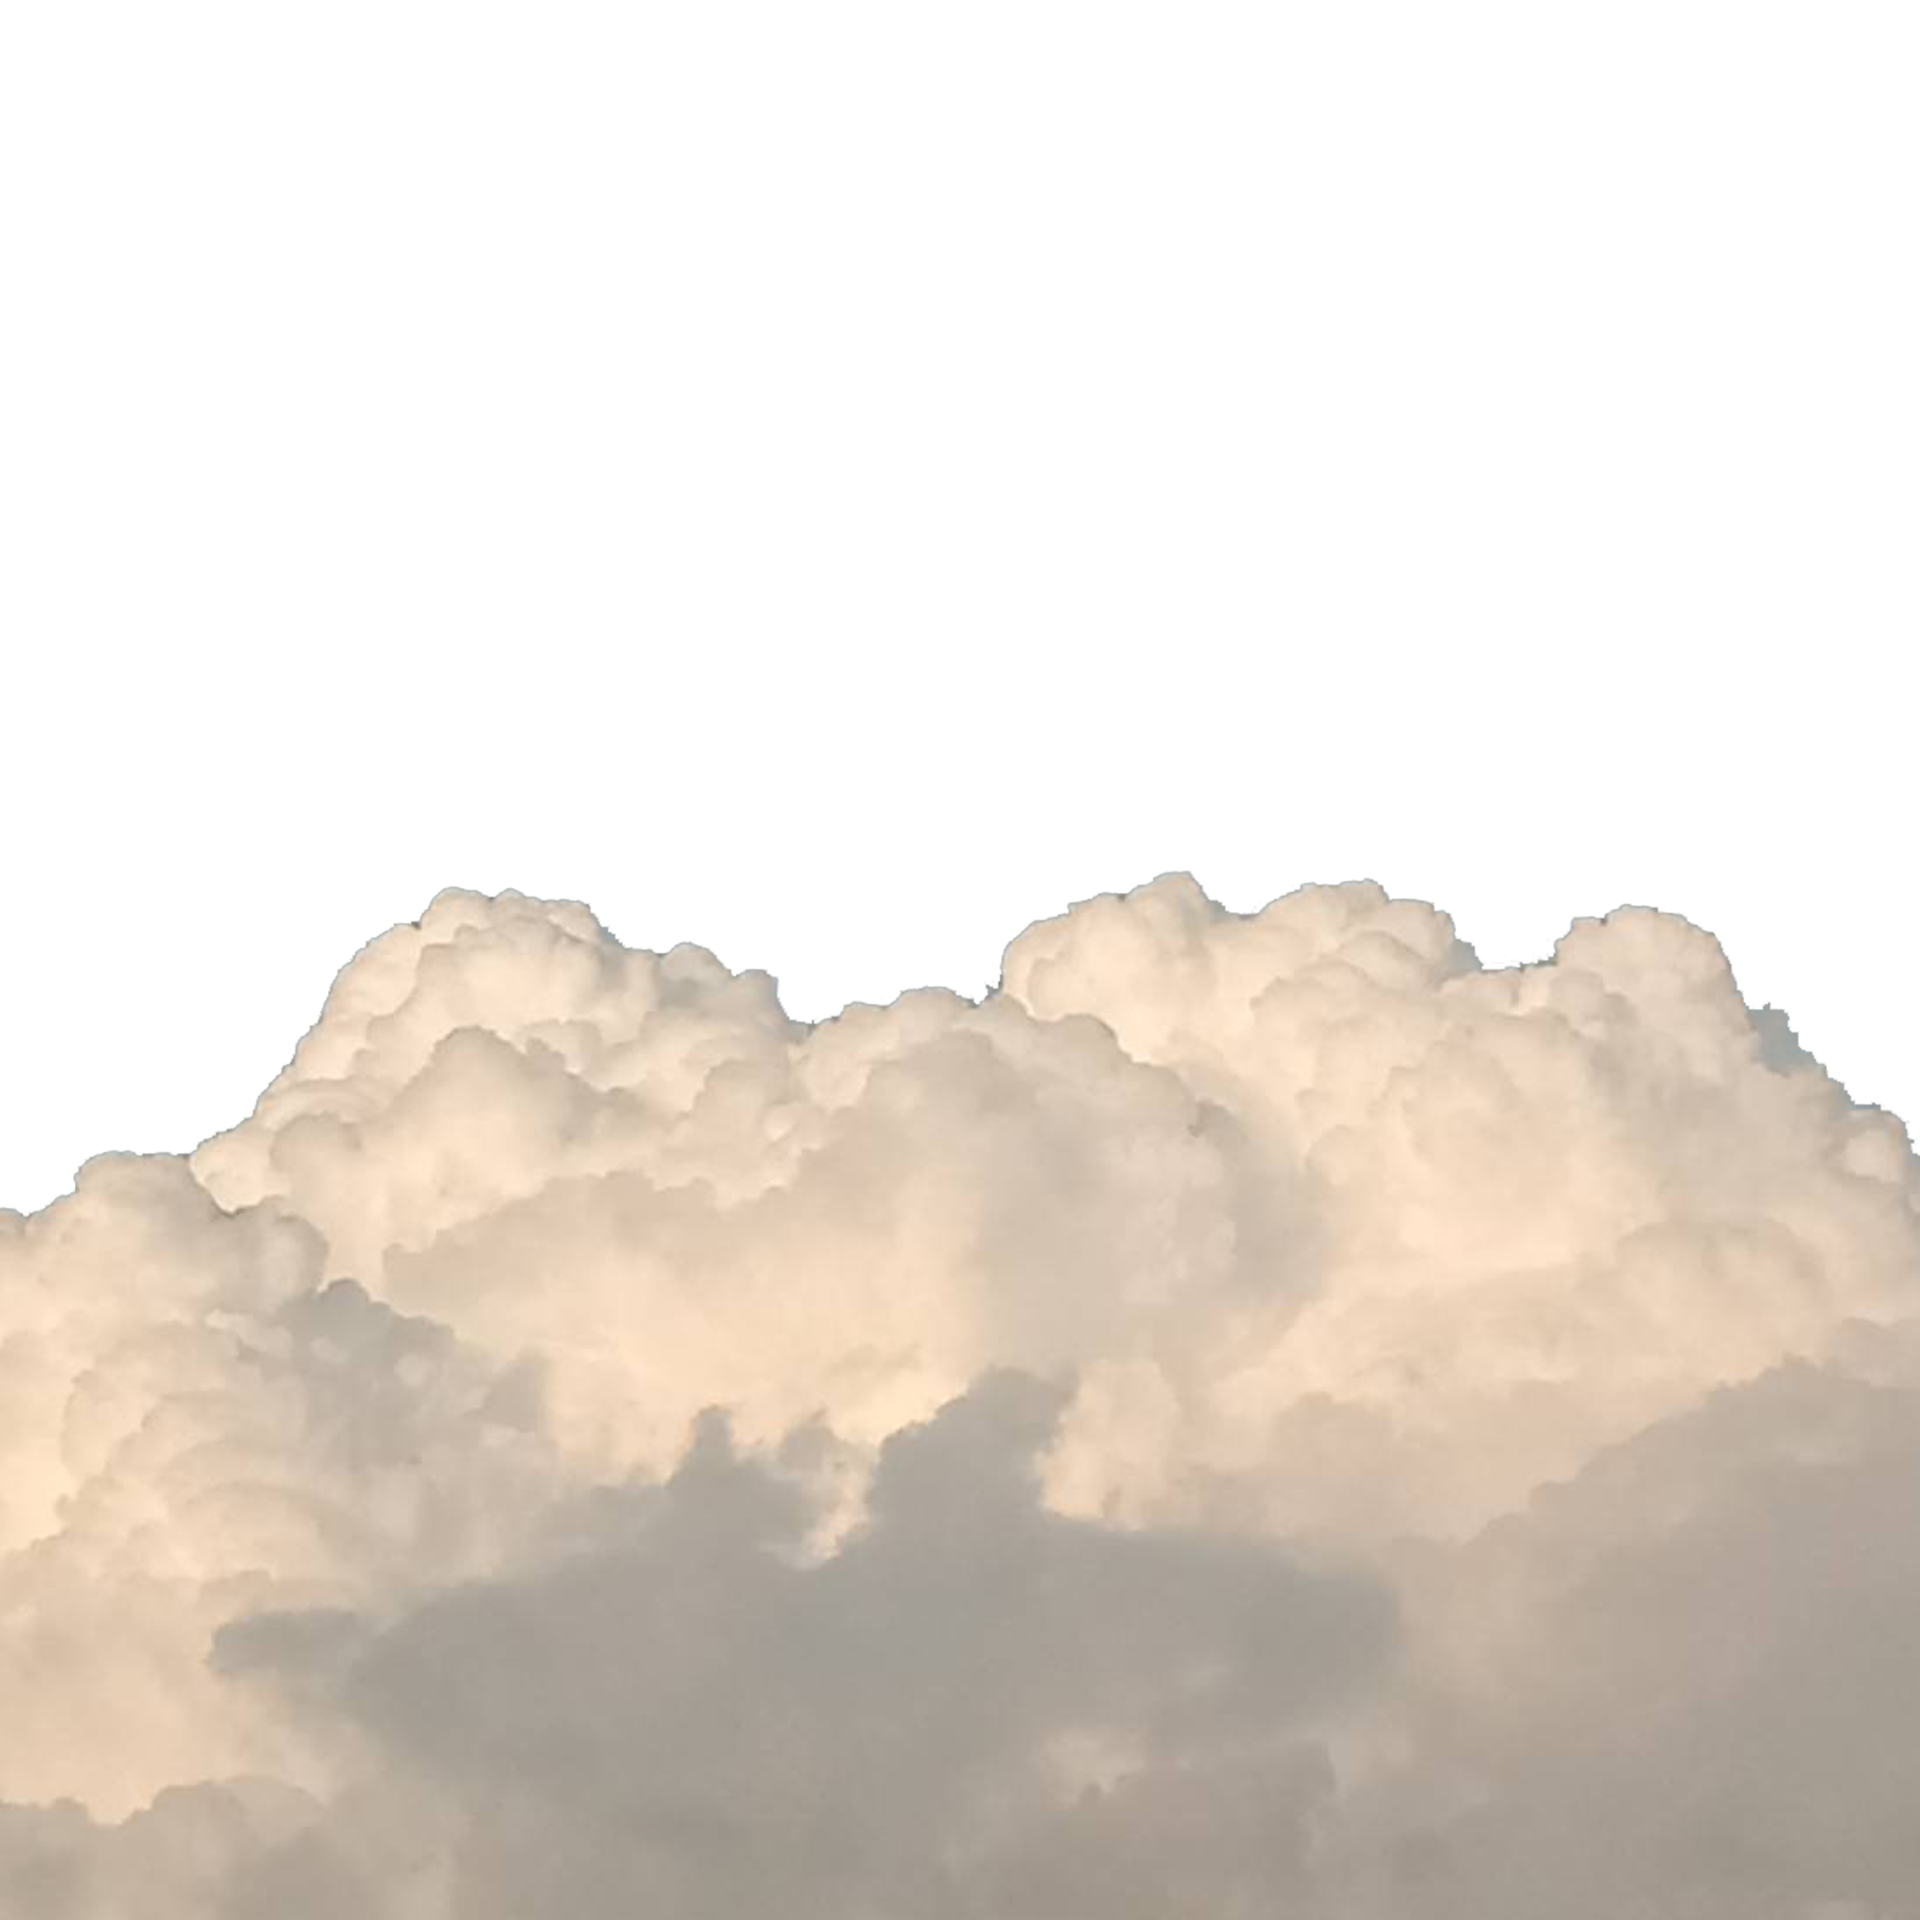 Cloudy Sky Pngs For Free Download